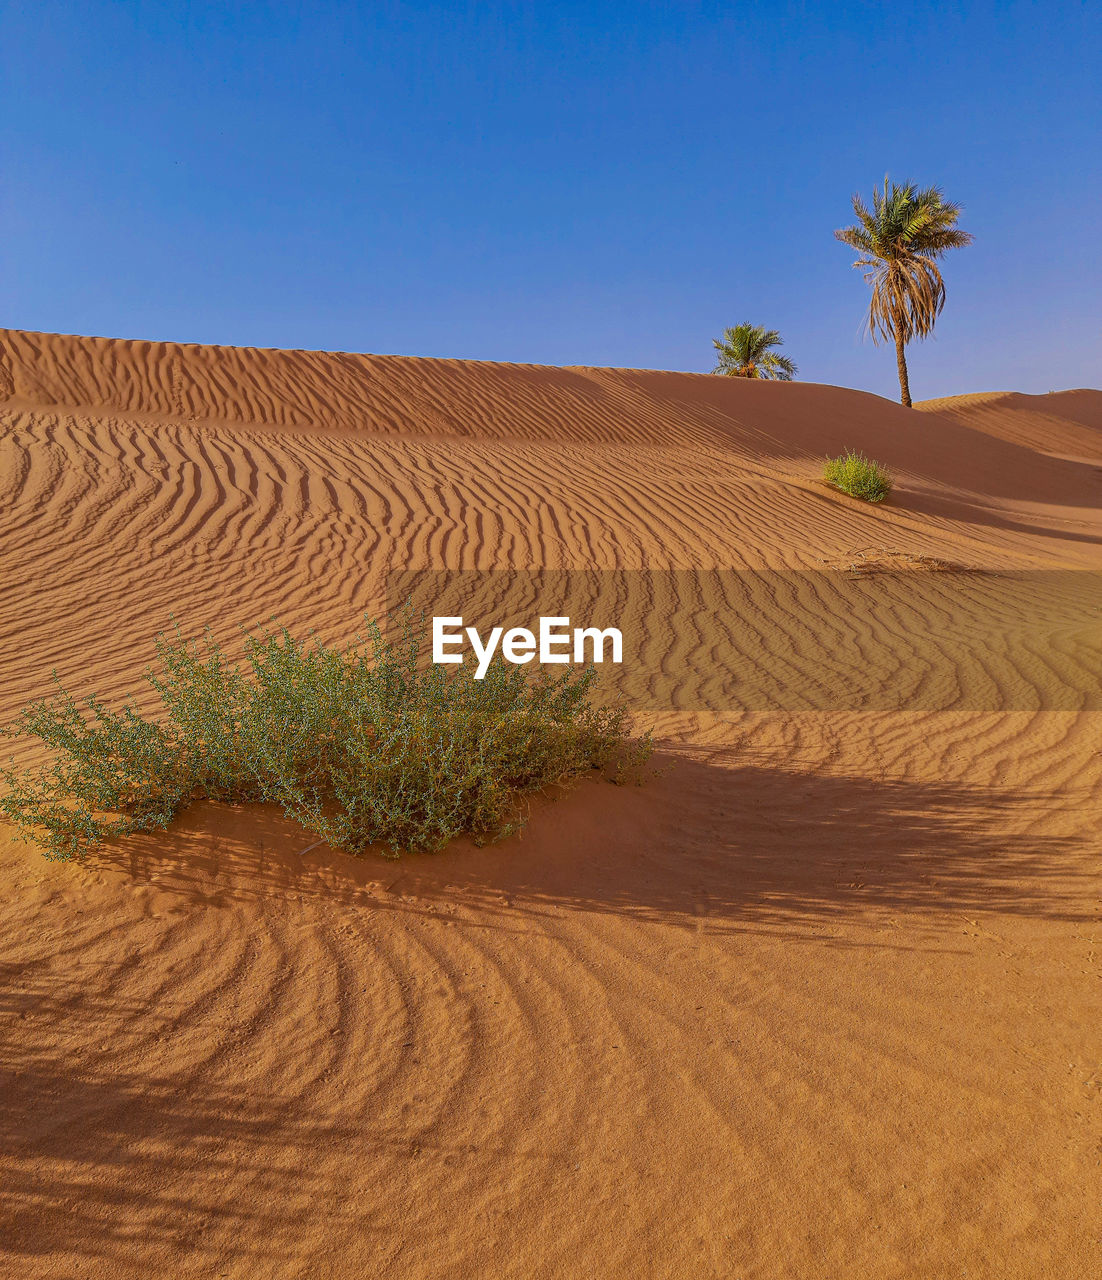 land, landscape, sand, environment, sand dune, erg, desert, scenics - nature, sky, nature, natural environment, climate, plant, beauty in nature, arid climate, grassland, clear sky, tropical climate, no people, dry, tranquility, blue, tree, travel, soil, singing sand, outdoors, day, travel destinations, non-urban scene, plain, dune, sunlight, sunny, accidents and disasters, palm tree, heat, horizon, tranquil scene, agriculture, horizon over land, pattern, tourism, animal wildlife, hill, drought, wadi, field, rural scene, semi-arid